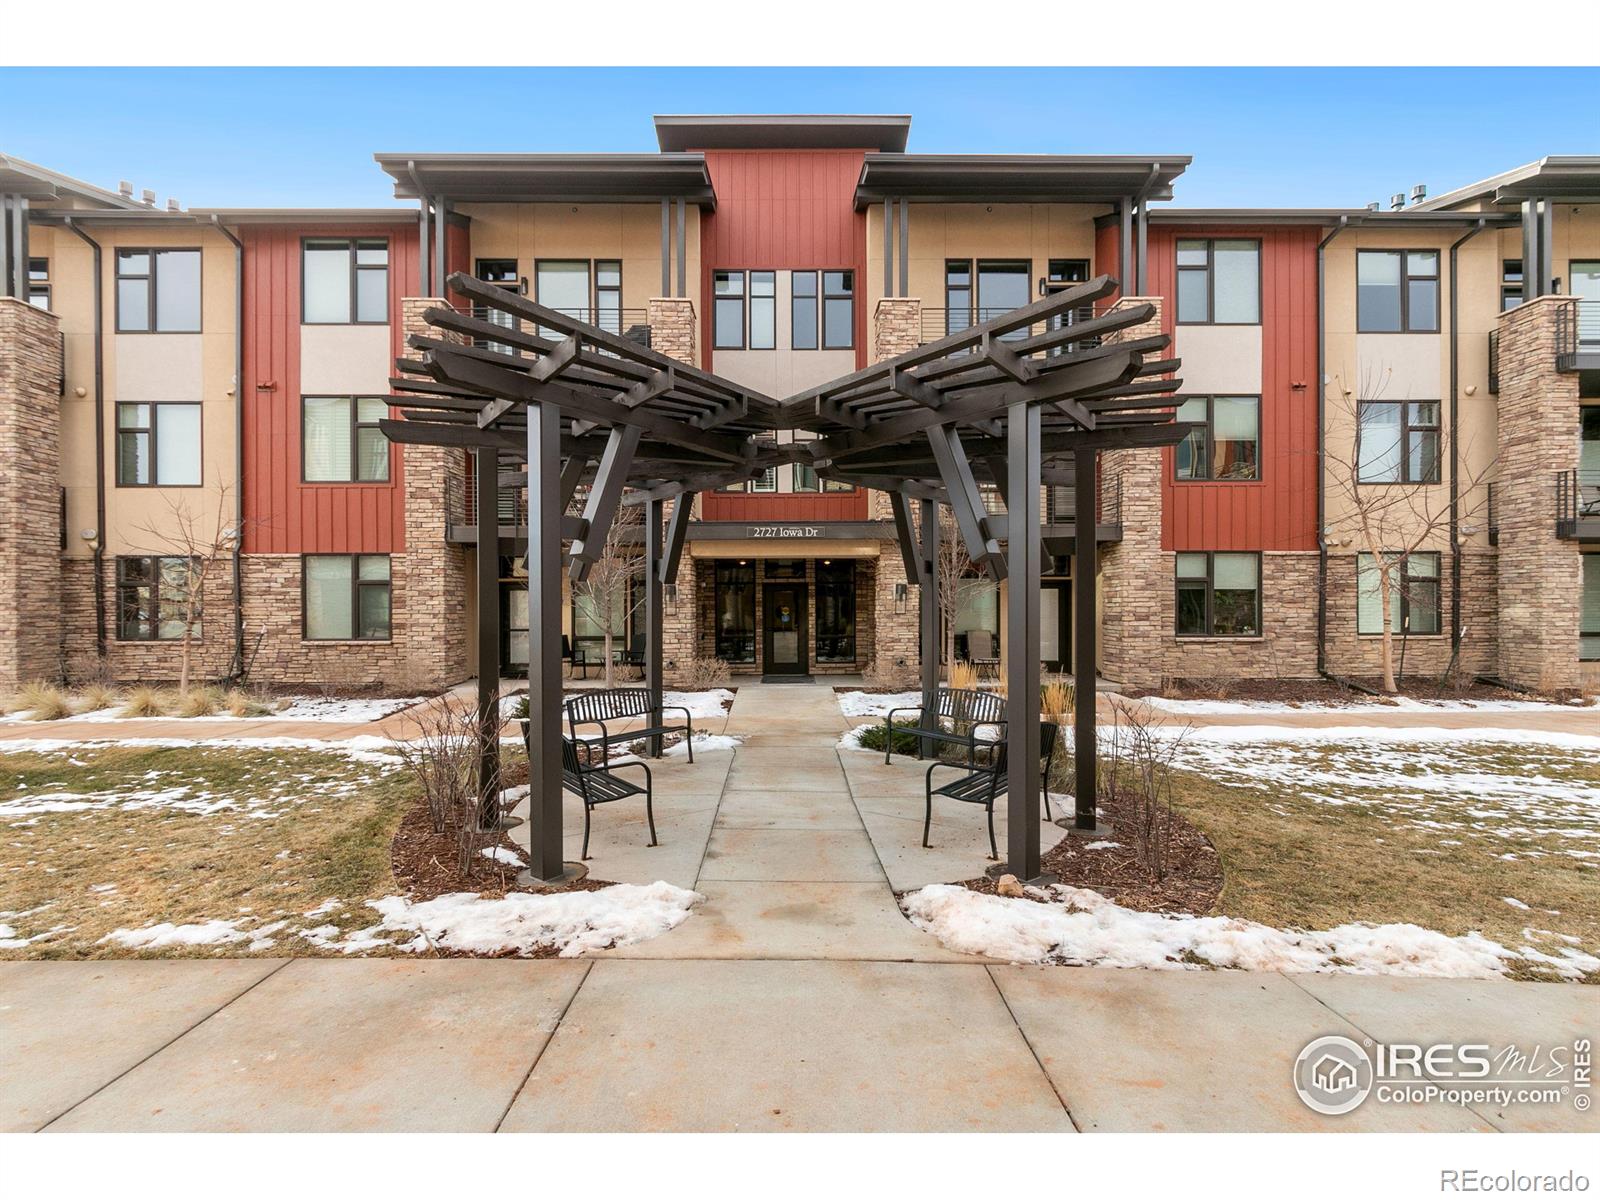 Report Image for 2727  Iowa Drive,Fort Collins, Colorado